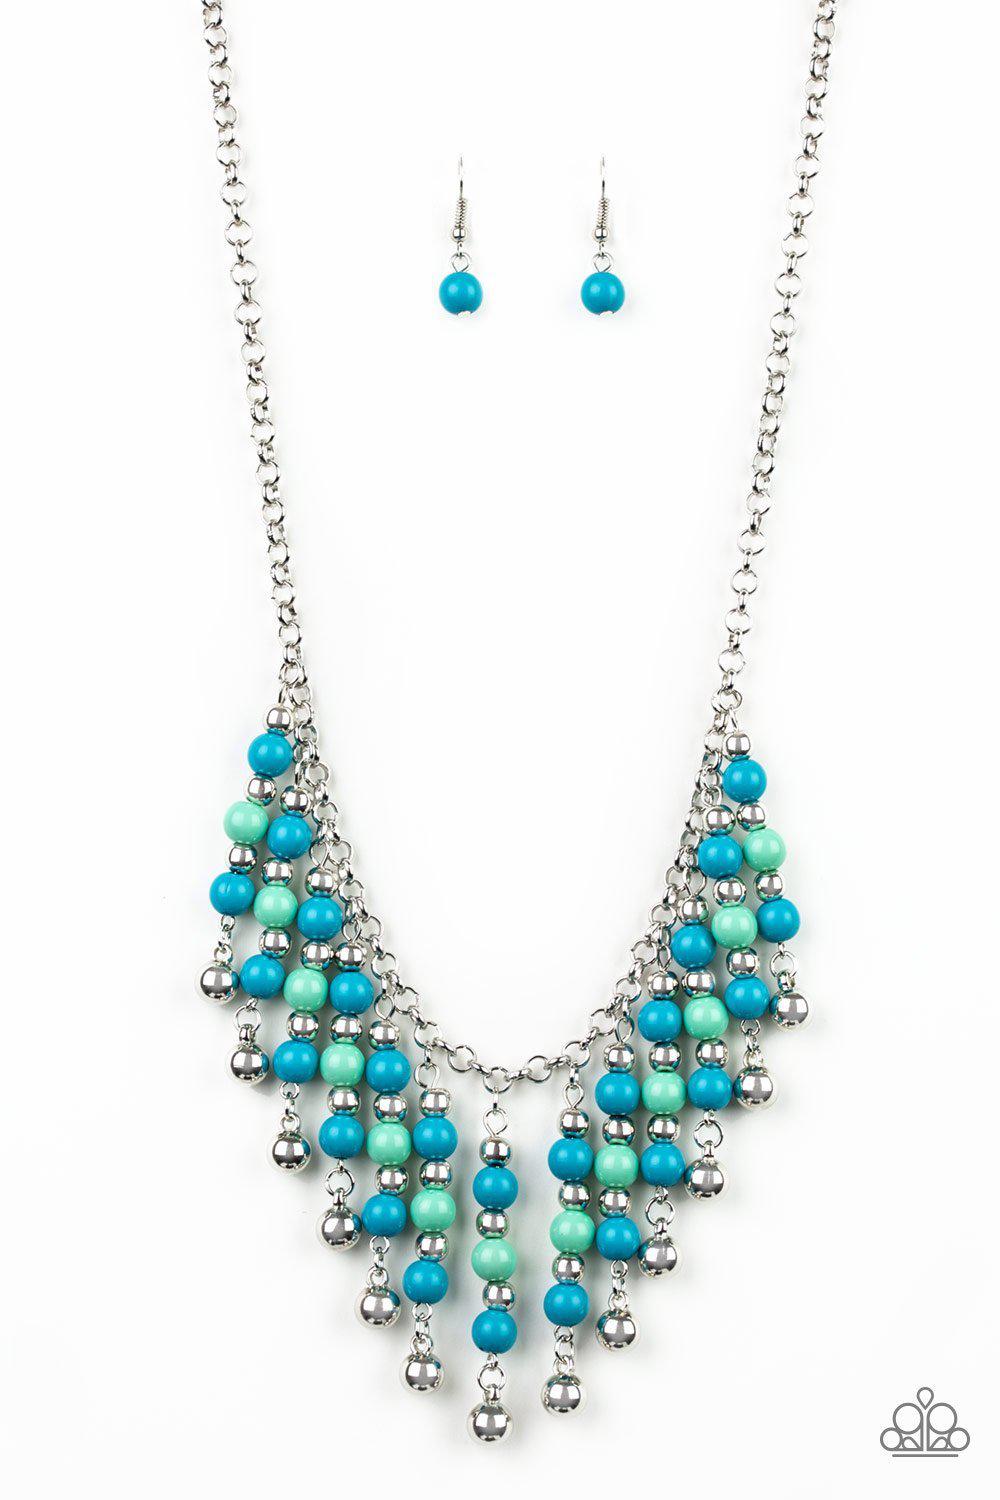 Your SUNDAE's Best Blue and Green Fringe Necklace - Paparazzi Accessories-CarasShop.com - $5 Jewelry by Cara Jewels